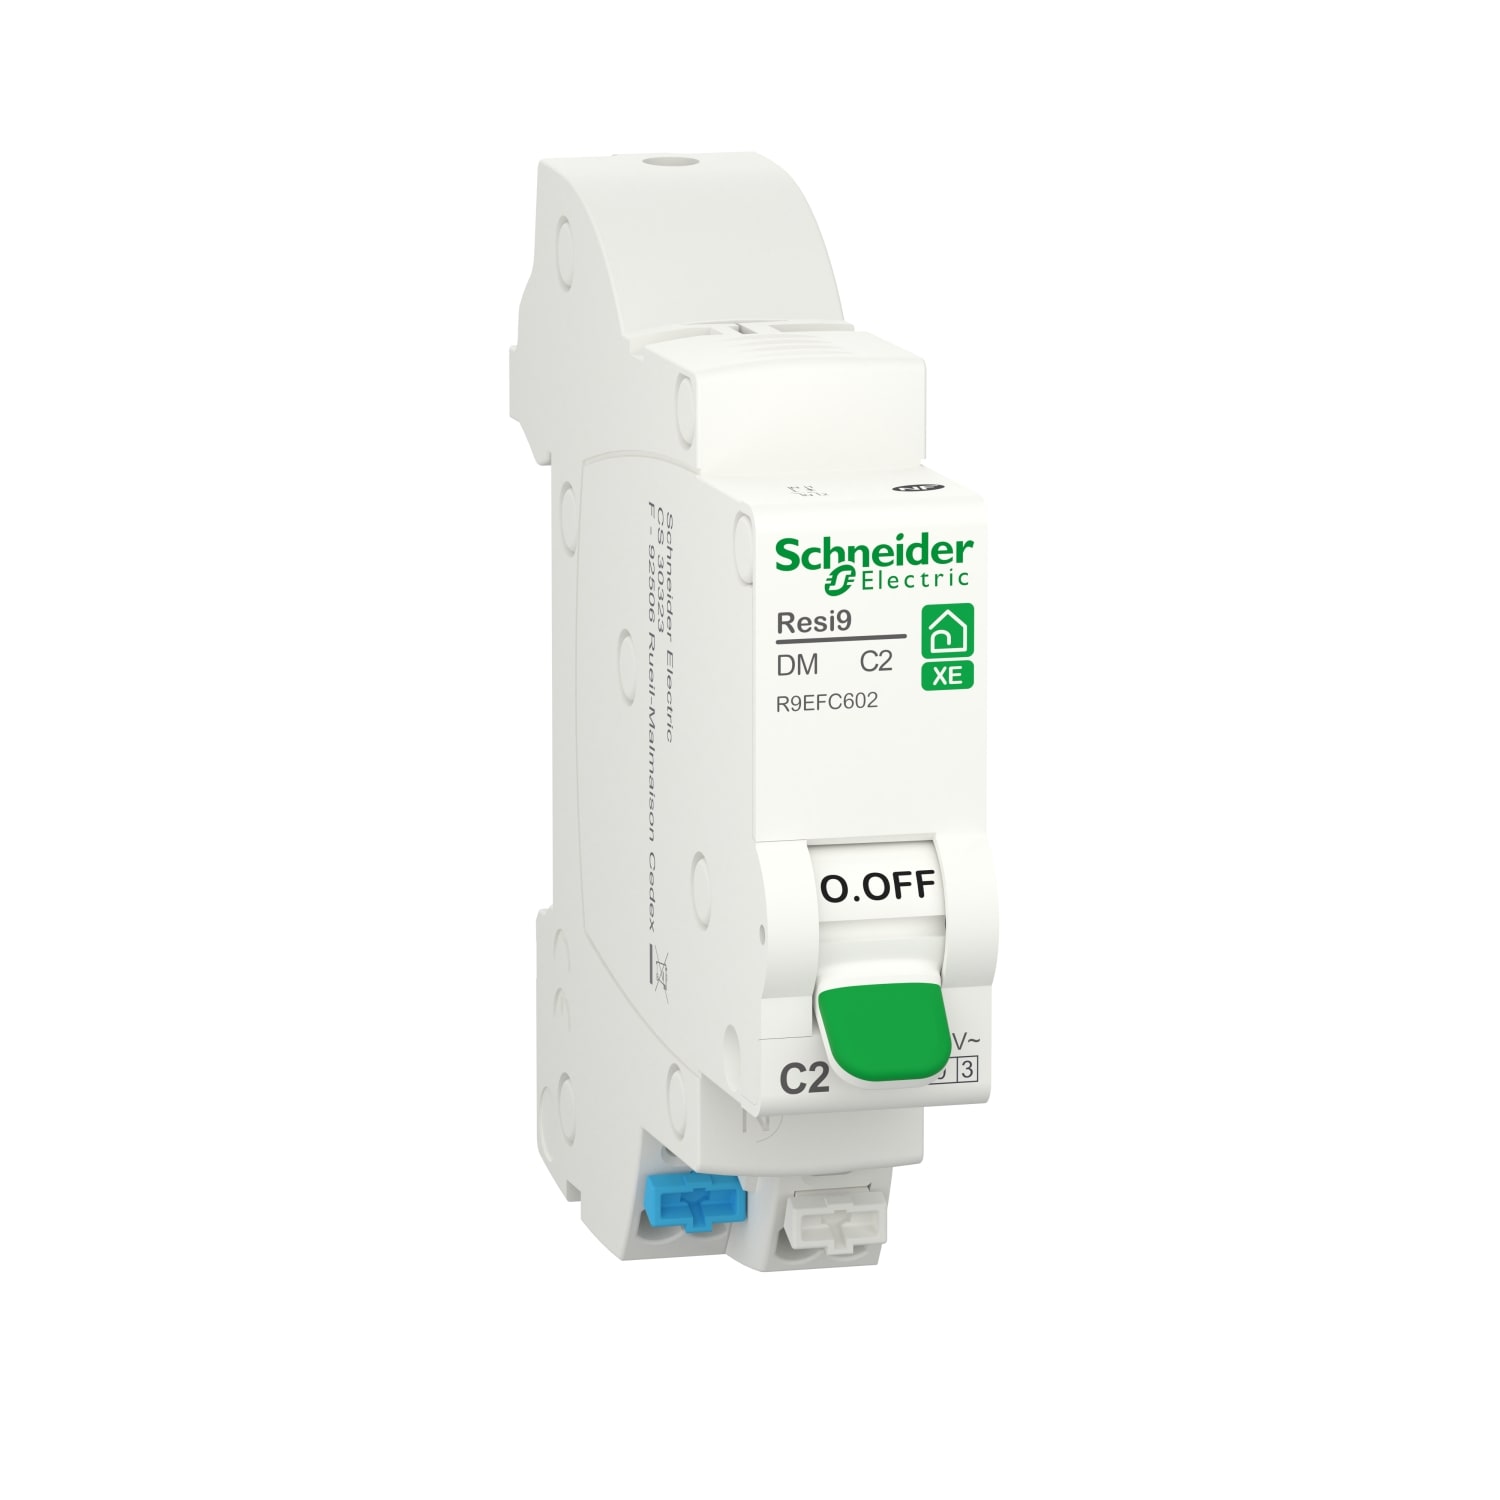 Schneider Electric - Resi9 XE - disjoncteur modulaire - 1P+N - 2A - courbe C - embrochable